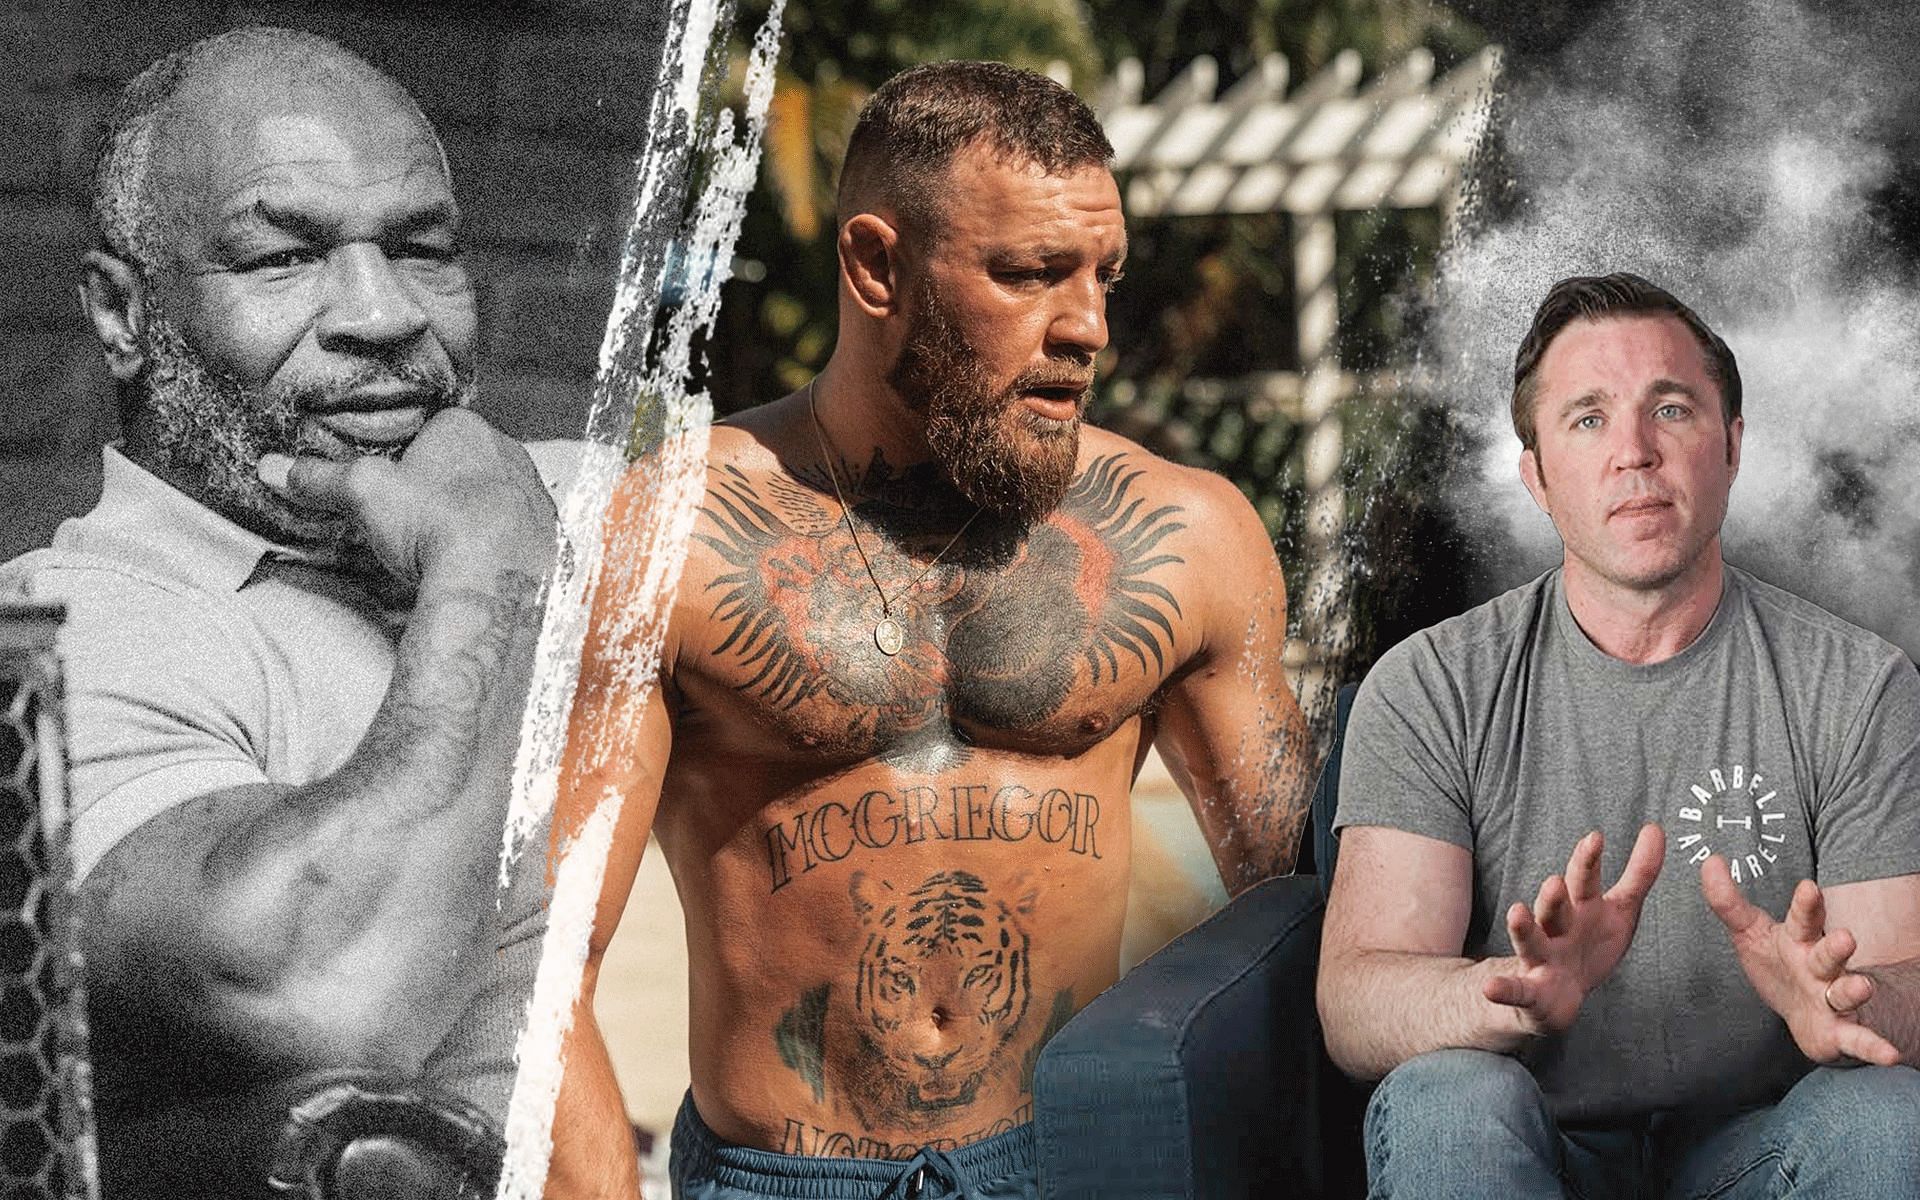 Chael Sonnen (right) contradicts Mike Tyson&#039;s (left) advice for Conor McGregor (center) [Photo credits: @hotboxinpodcast, @thenotoriousmma on Instagram, and YouTube.com]